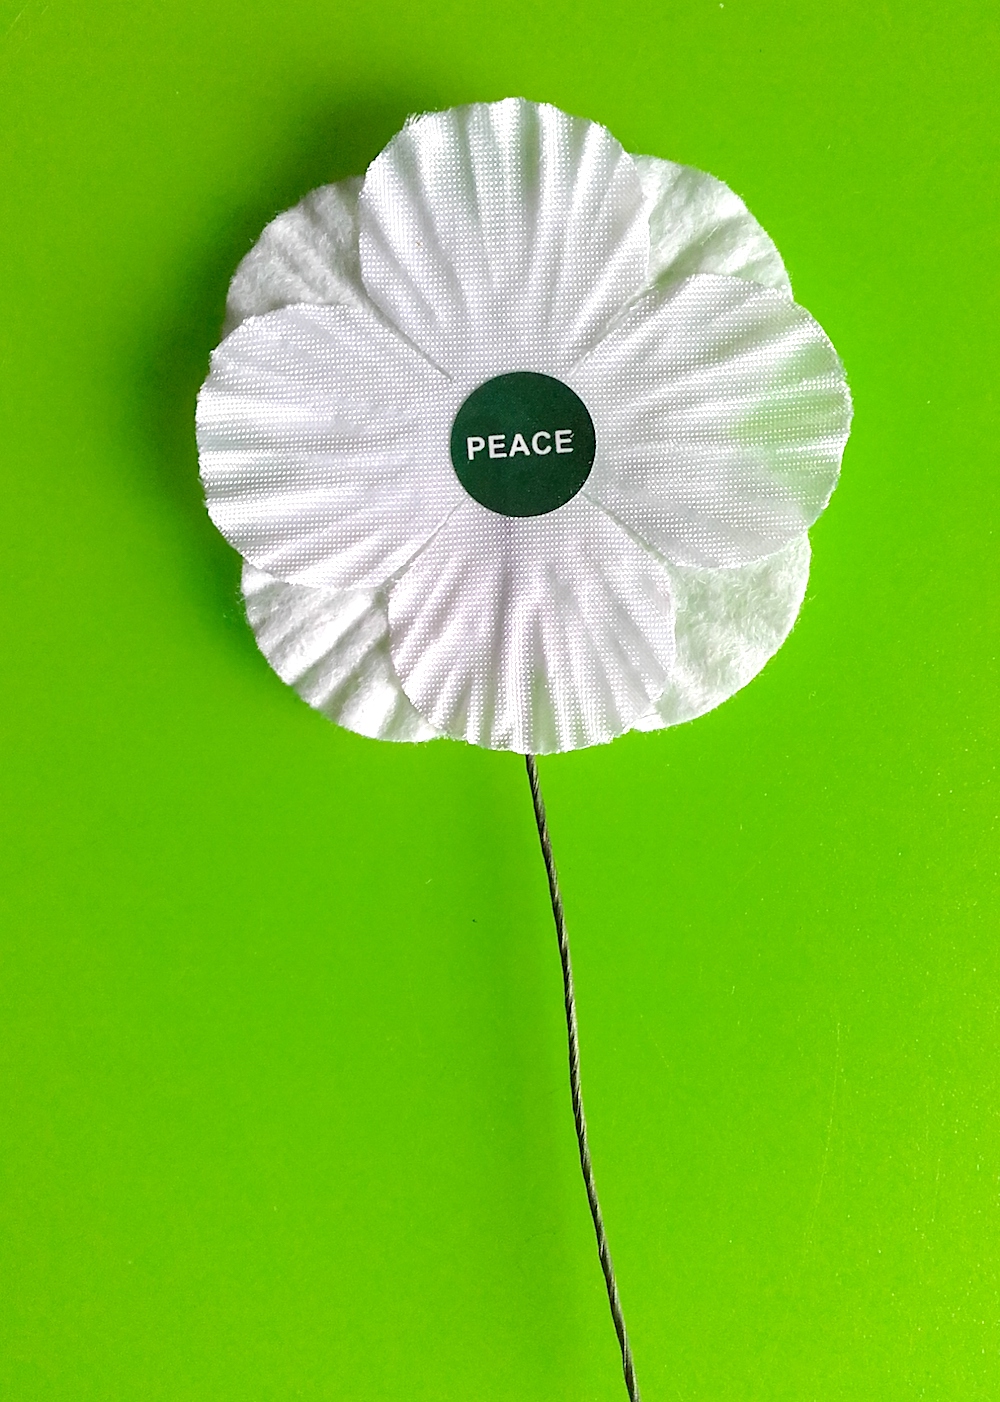 The Peace Pledge Union took over the production of the white poppy in 1936